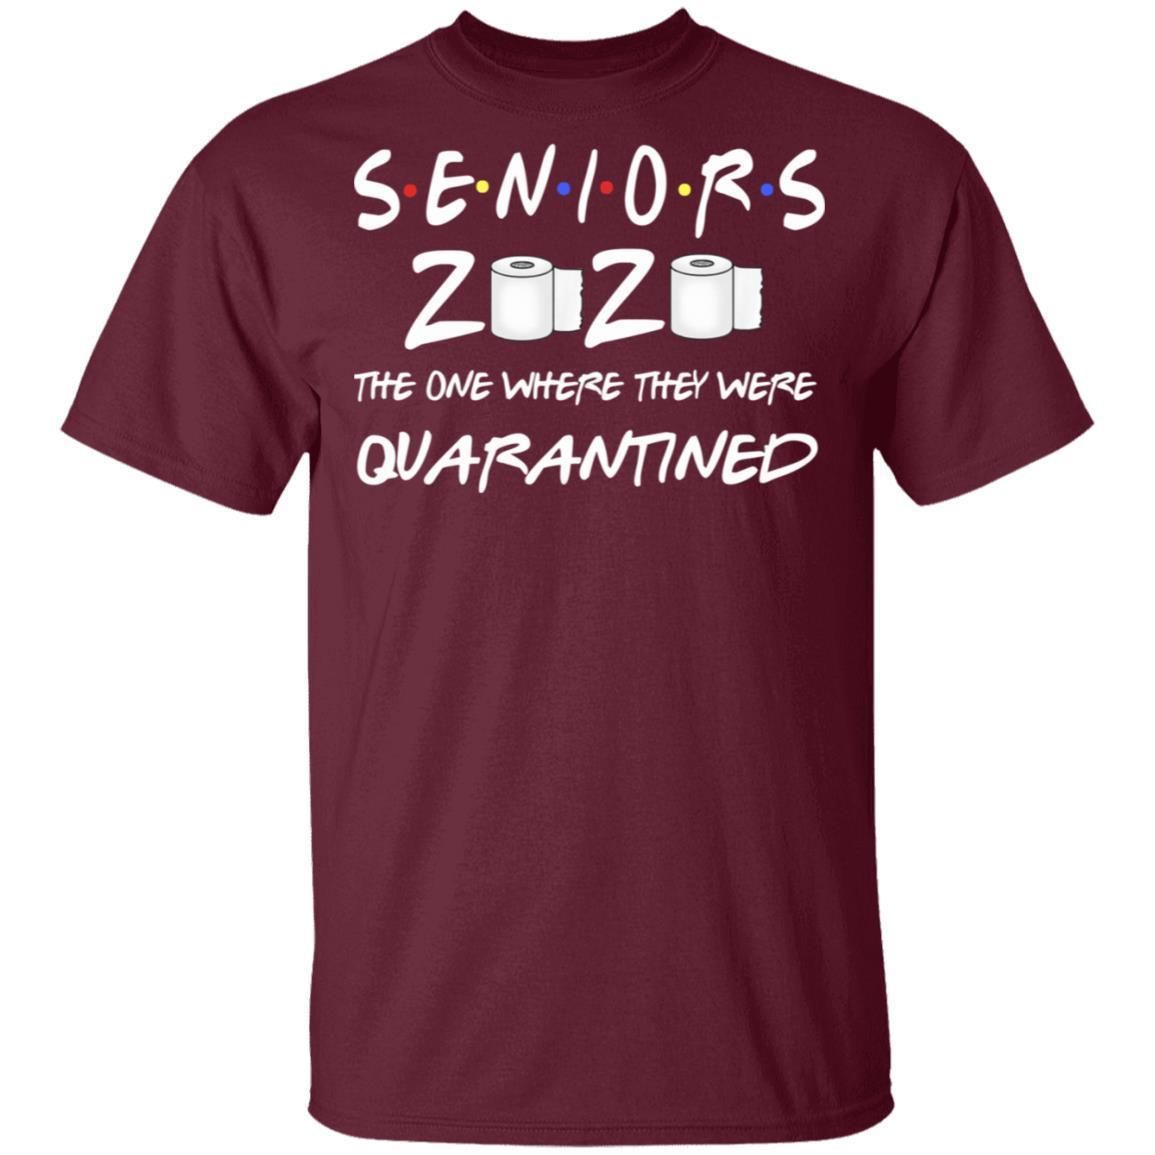 Seniors 2020 The One Where They Were Quarantined Toilet Paper Funny shirts